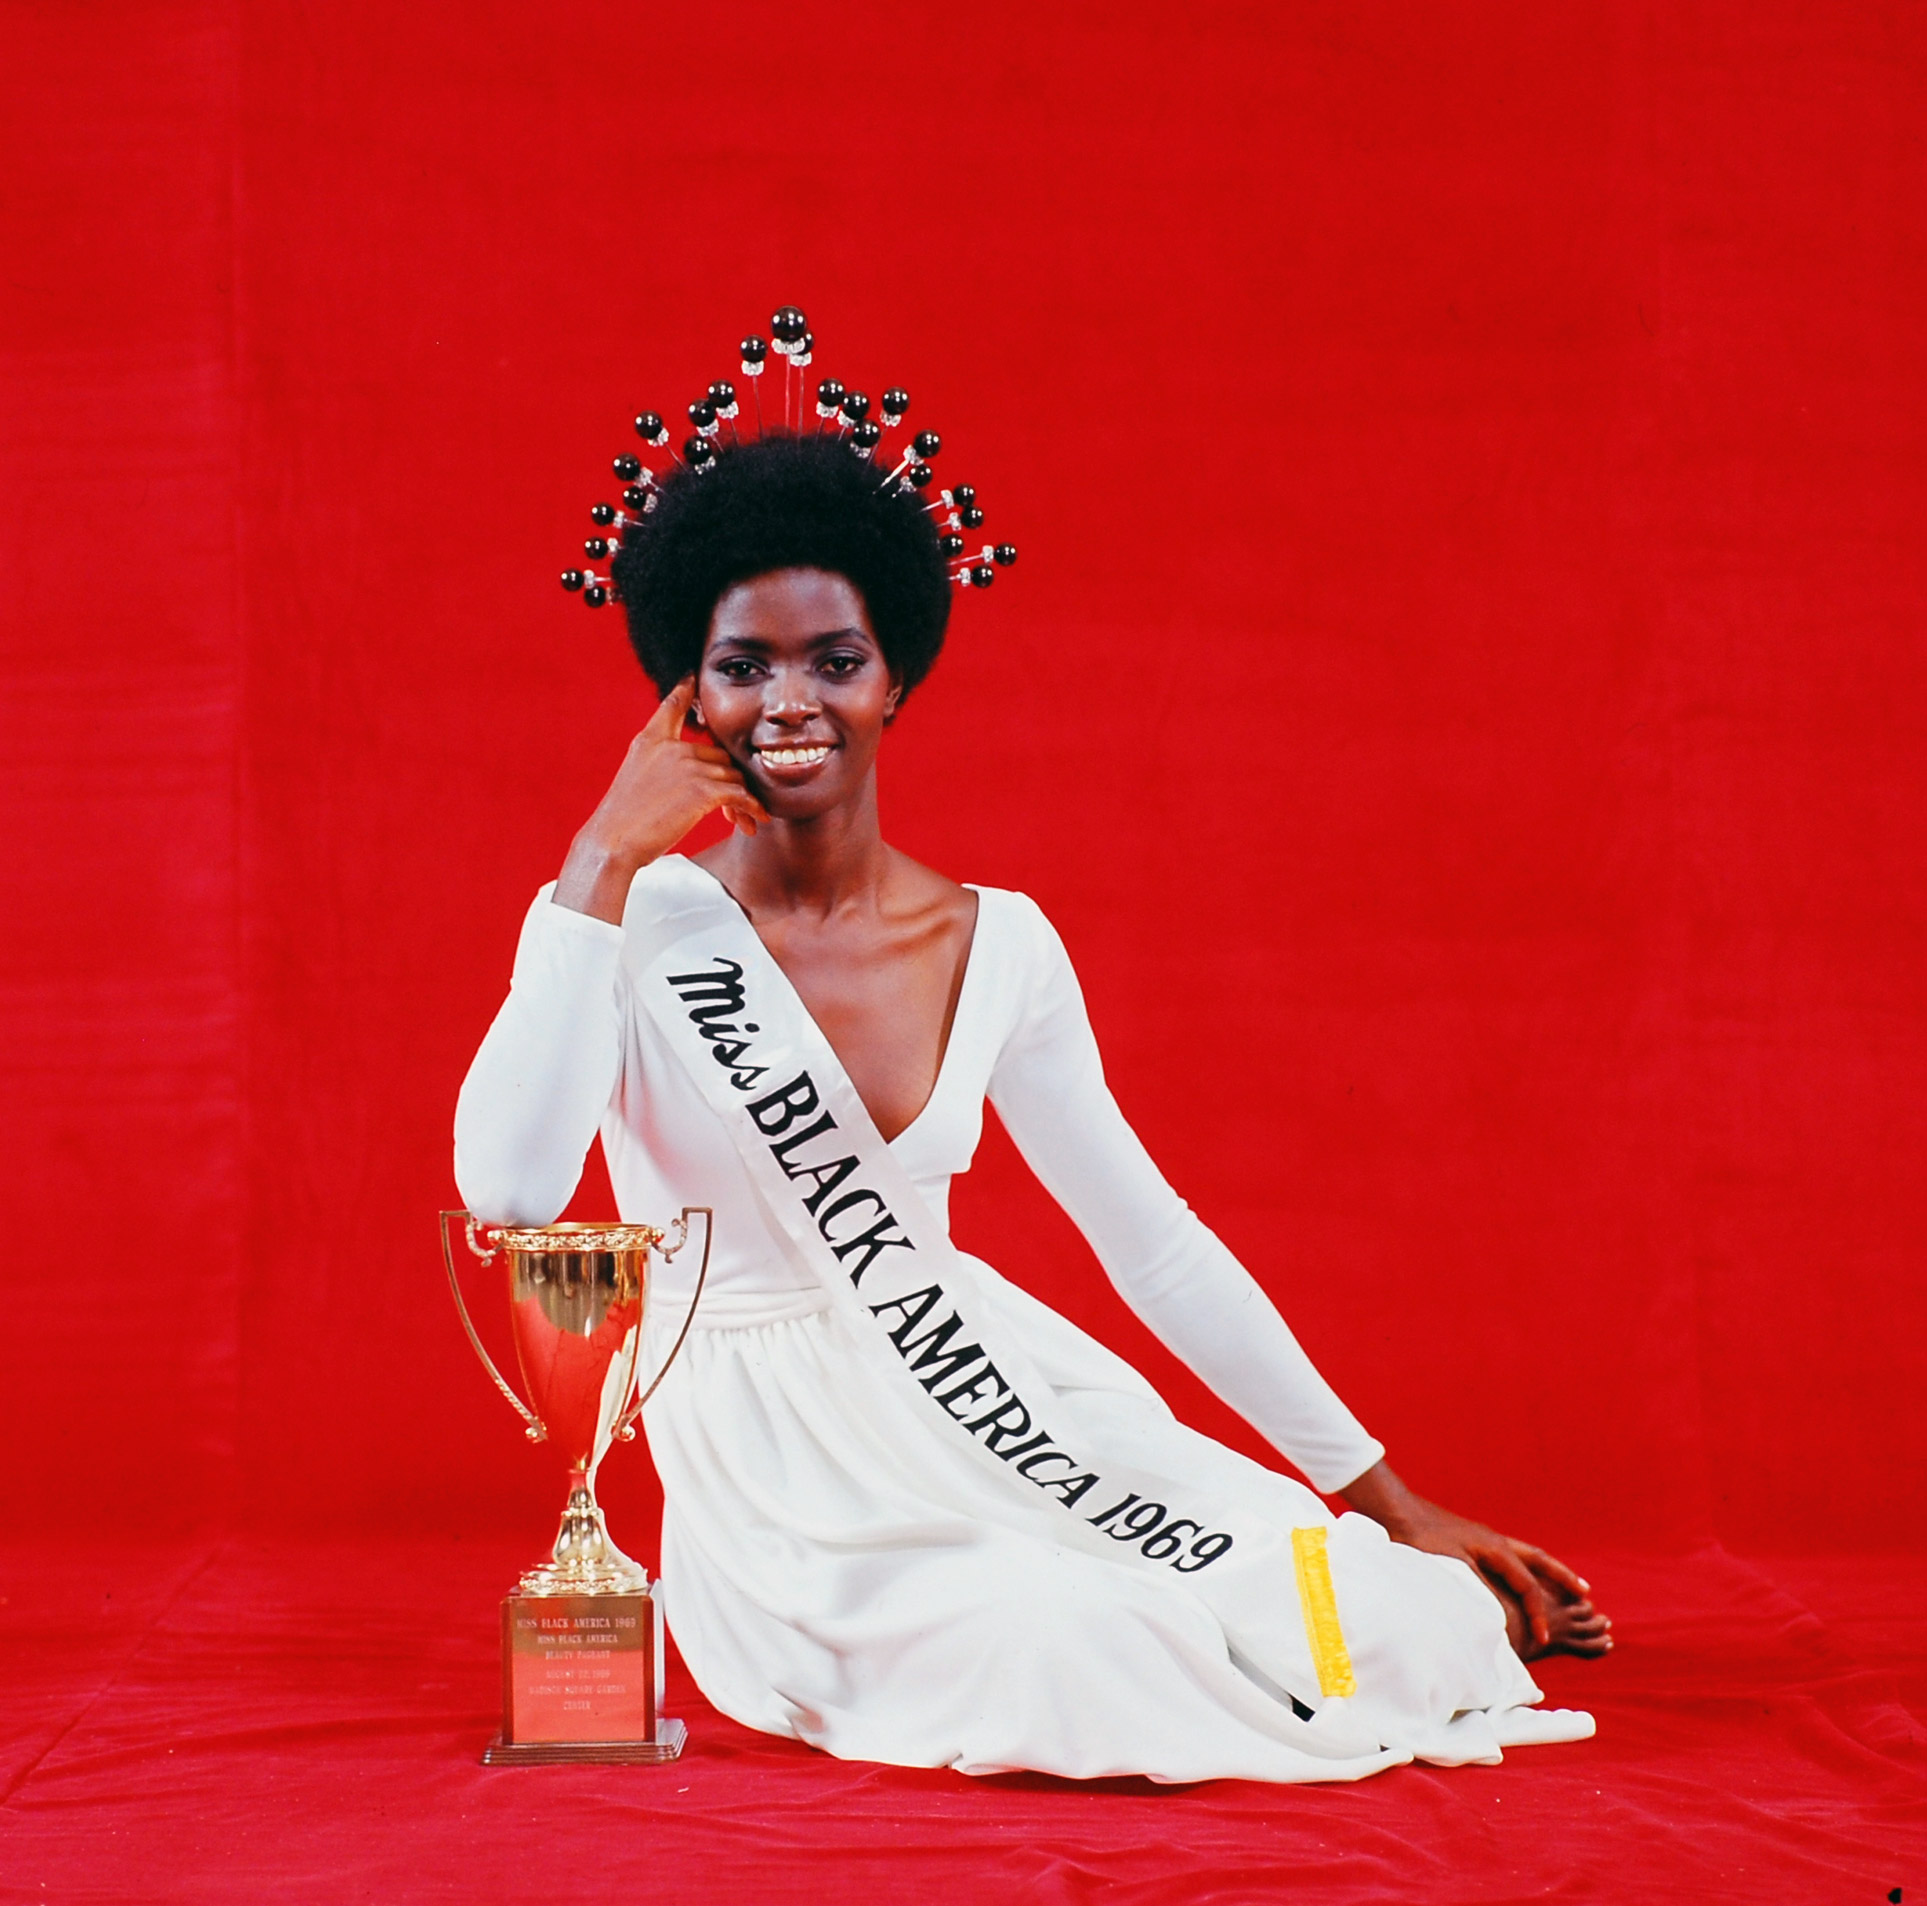 Professional model Gloria Smith wears the crown in which she was acclaimed winner of the 1969 Miss Black America contest in Madison Square Garden.